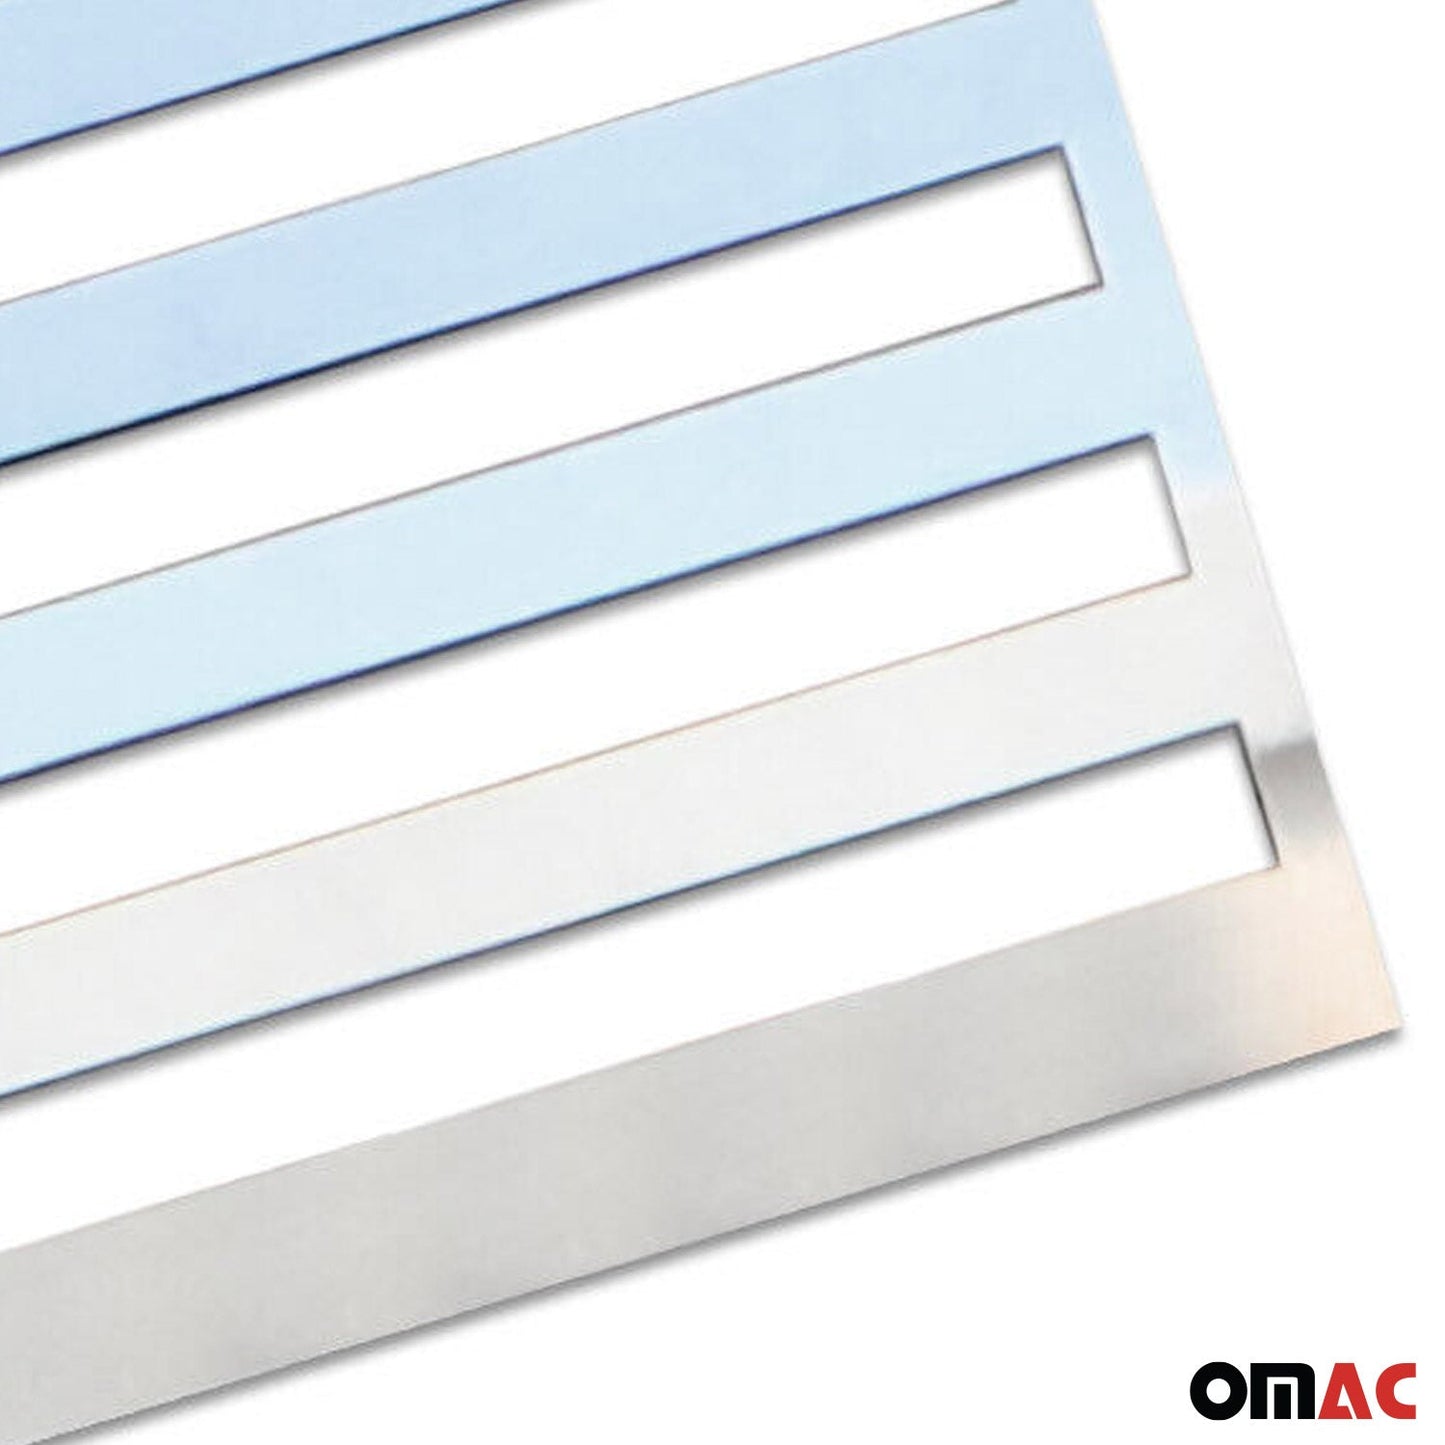 OMAC 2 Pcs US American Flag for Toyota Tacoma Chrome Decal Sticker Stainless Steel U001707